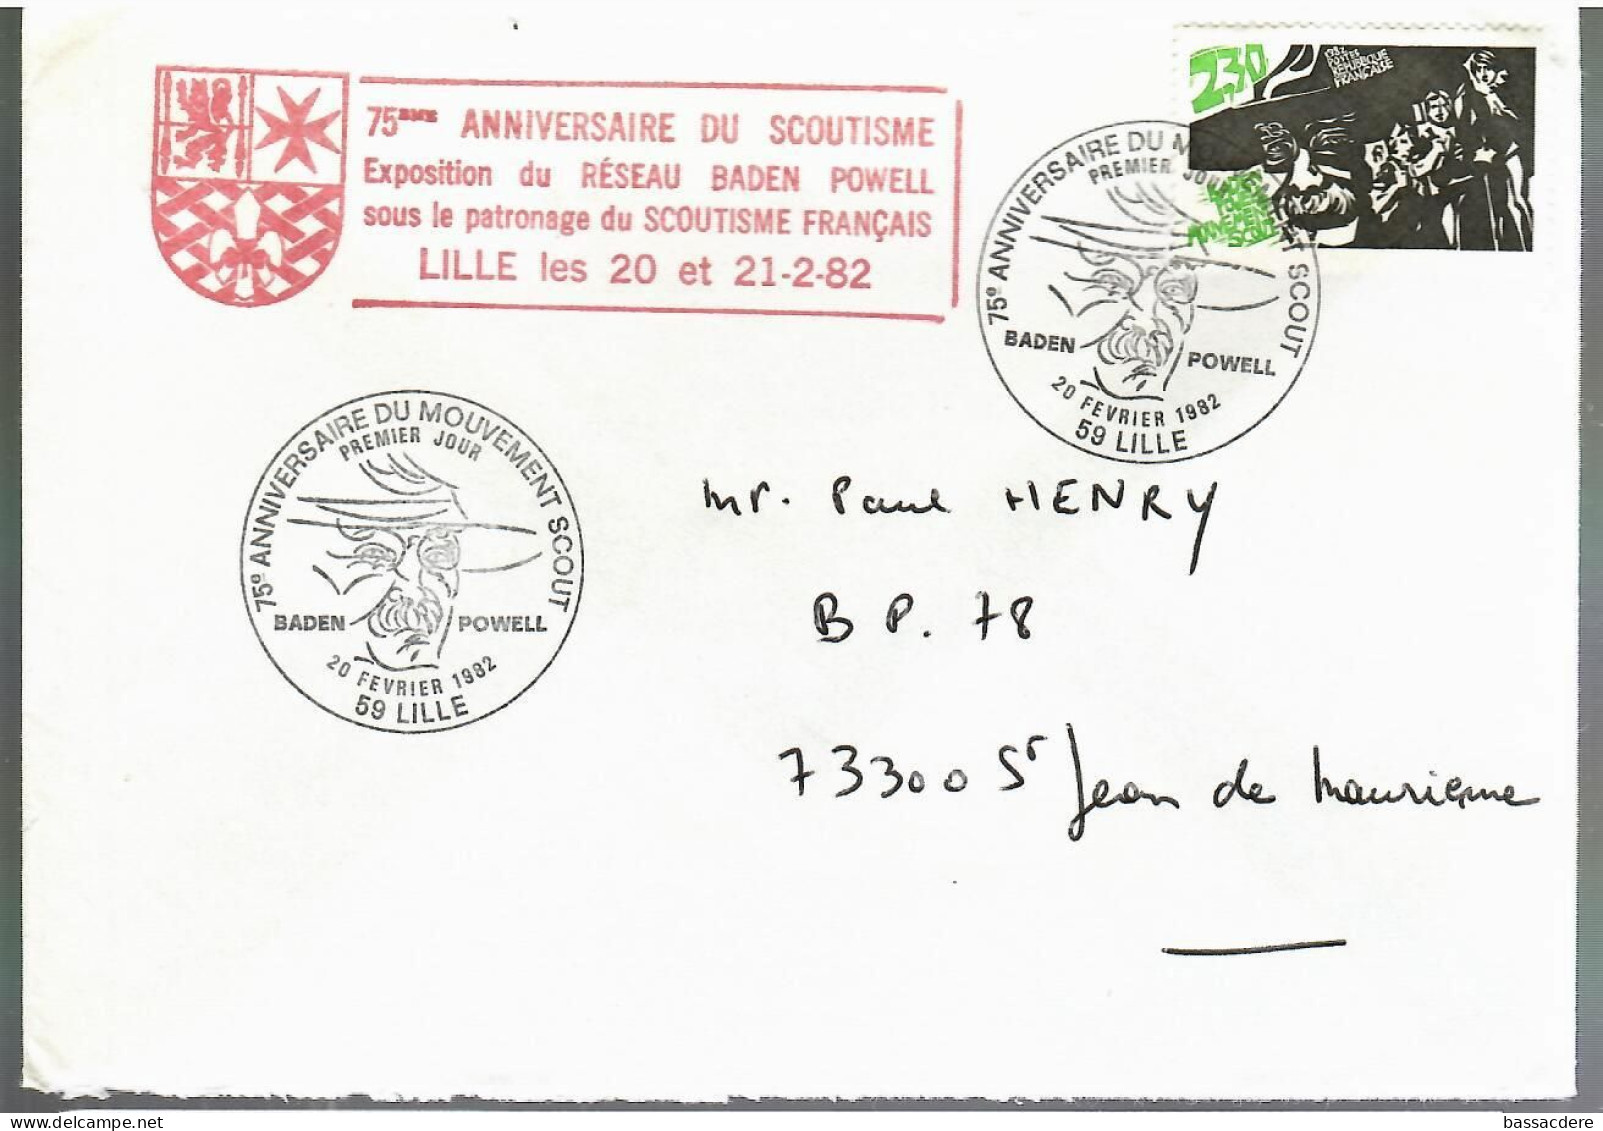 79988 - BADEN  POWELL - Covers & Documents